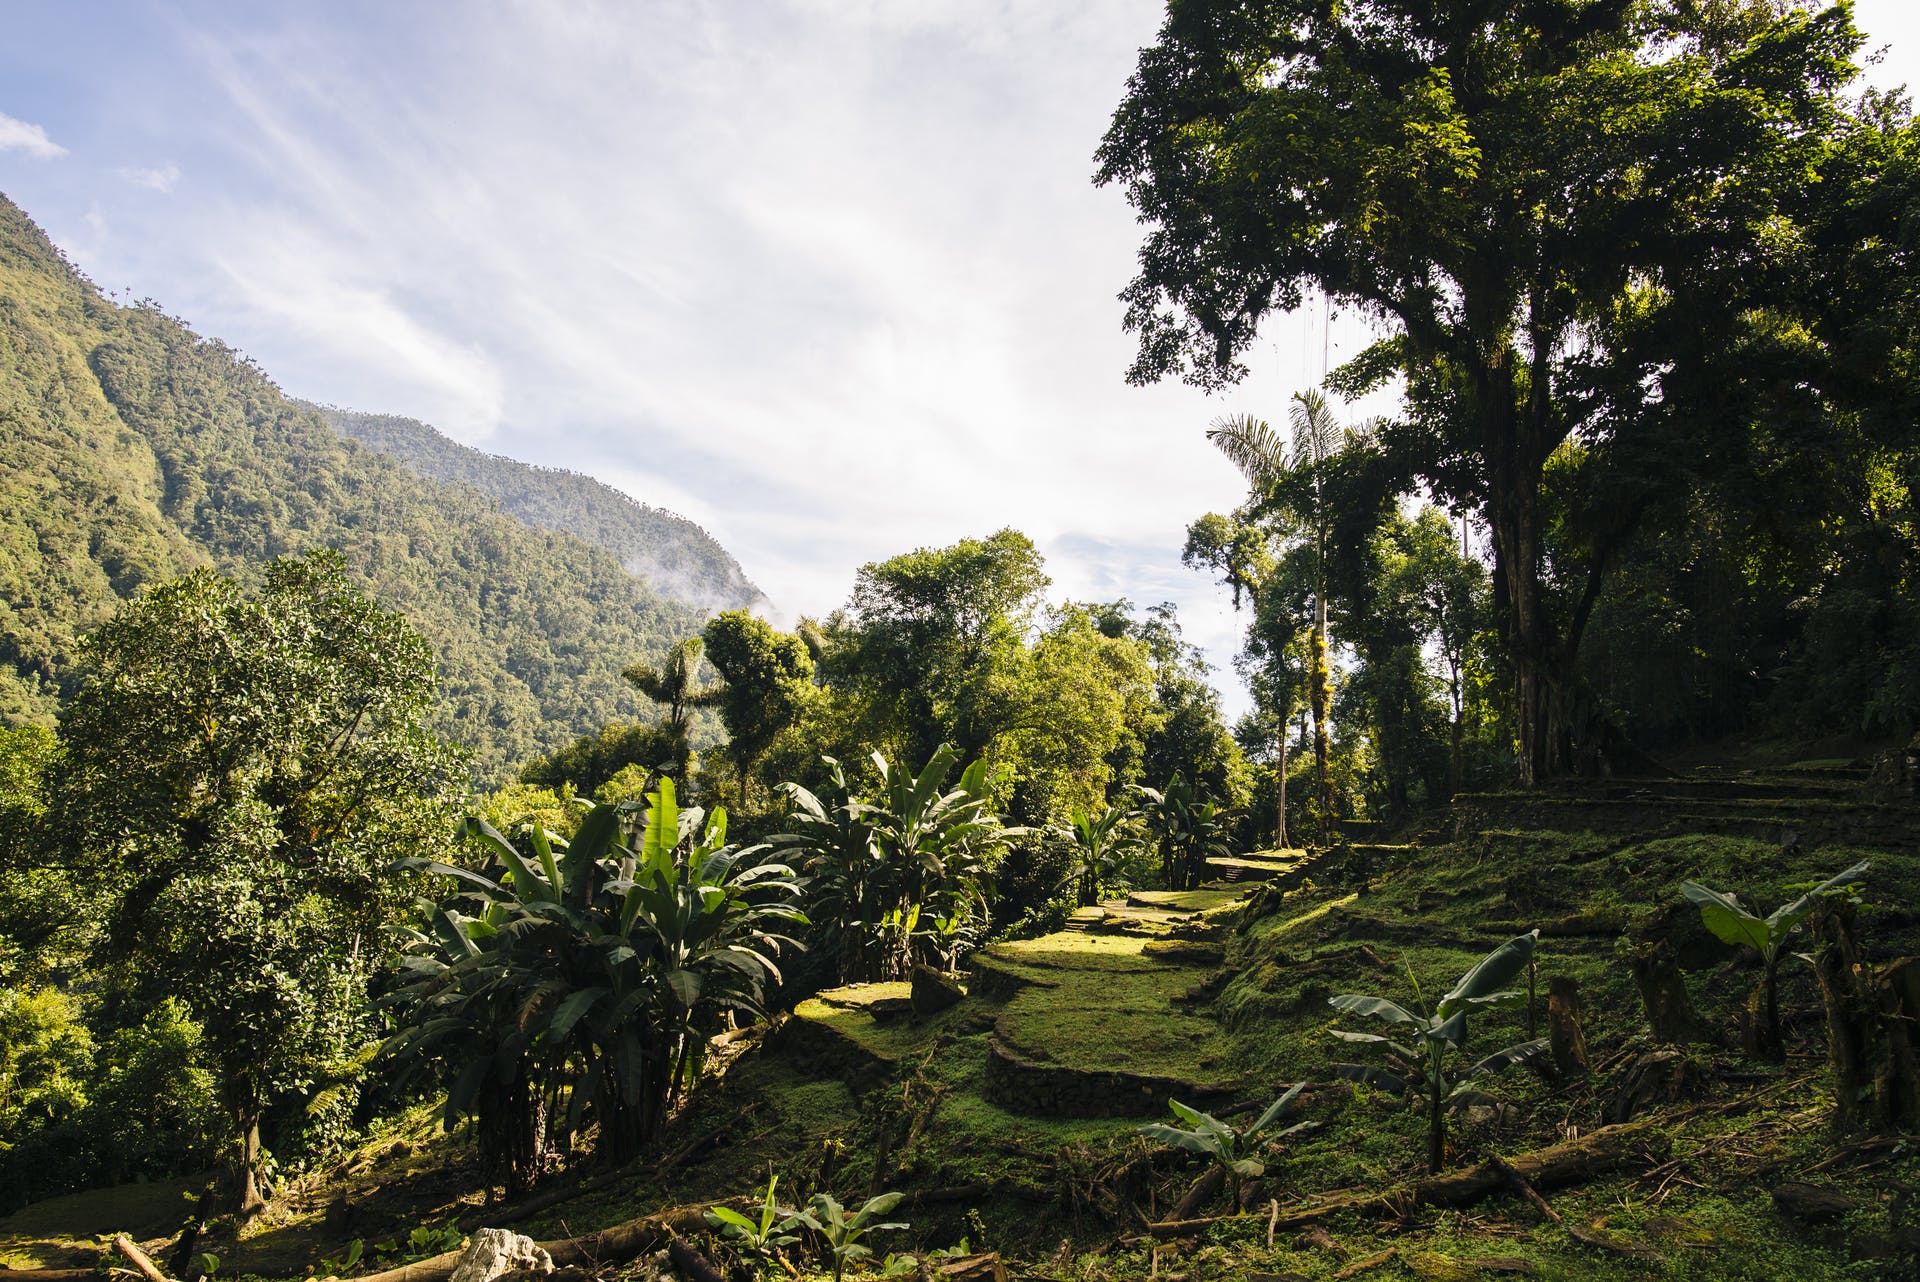 Trek Colombia's Mountains and Lost City